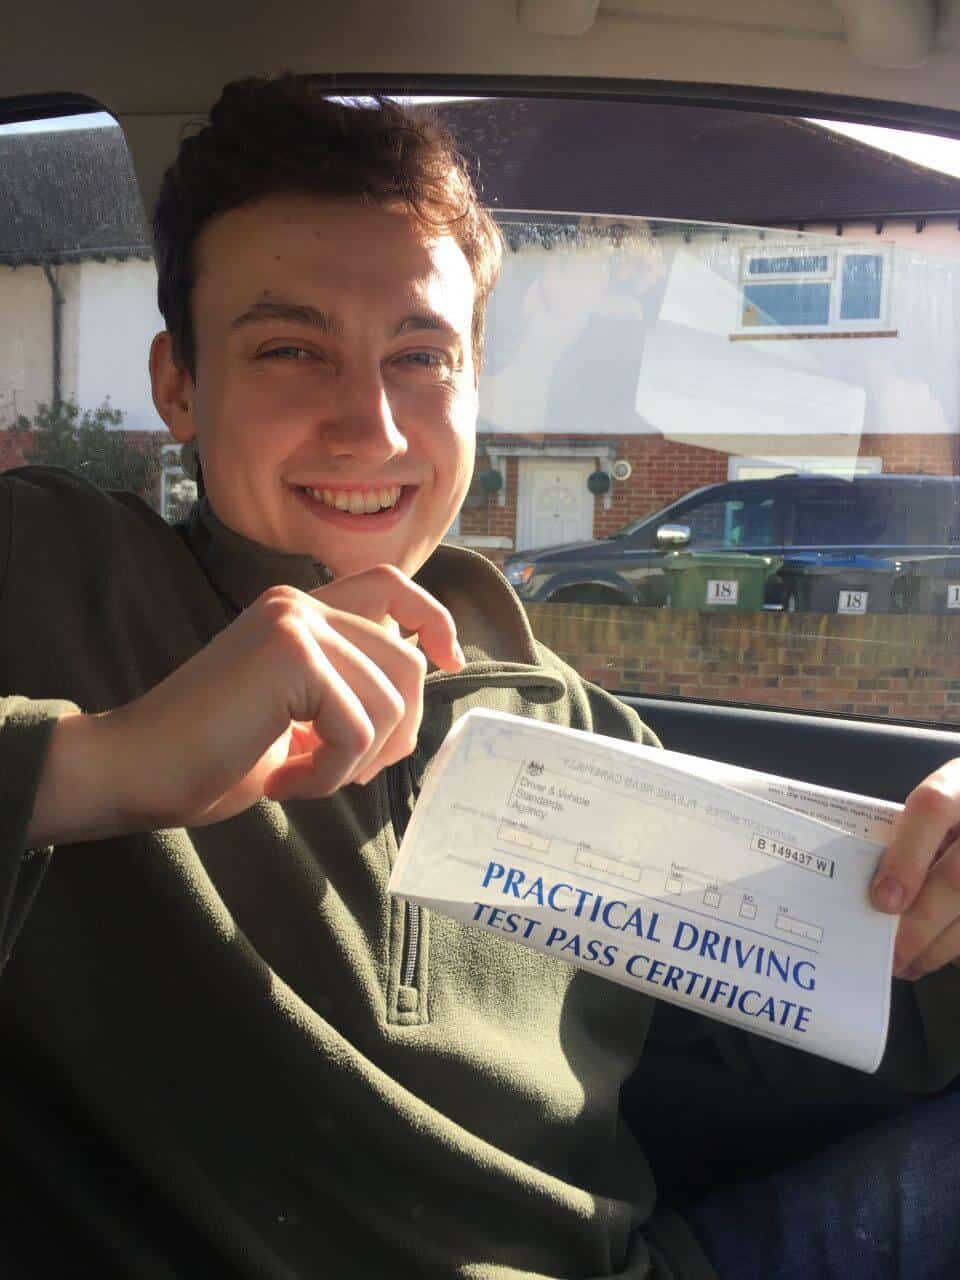 Congratulations to Austin from London N12 on passing your practical test with the help of Sandy from Intensive Courses